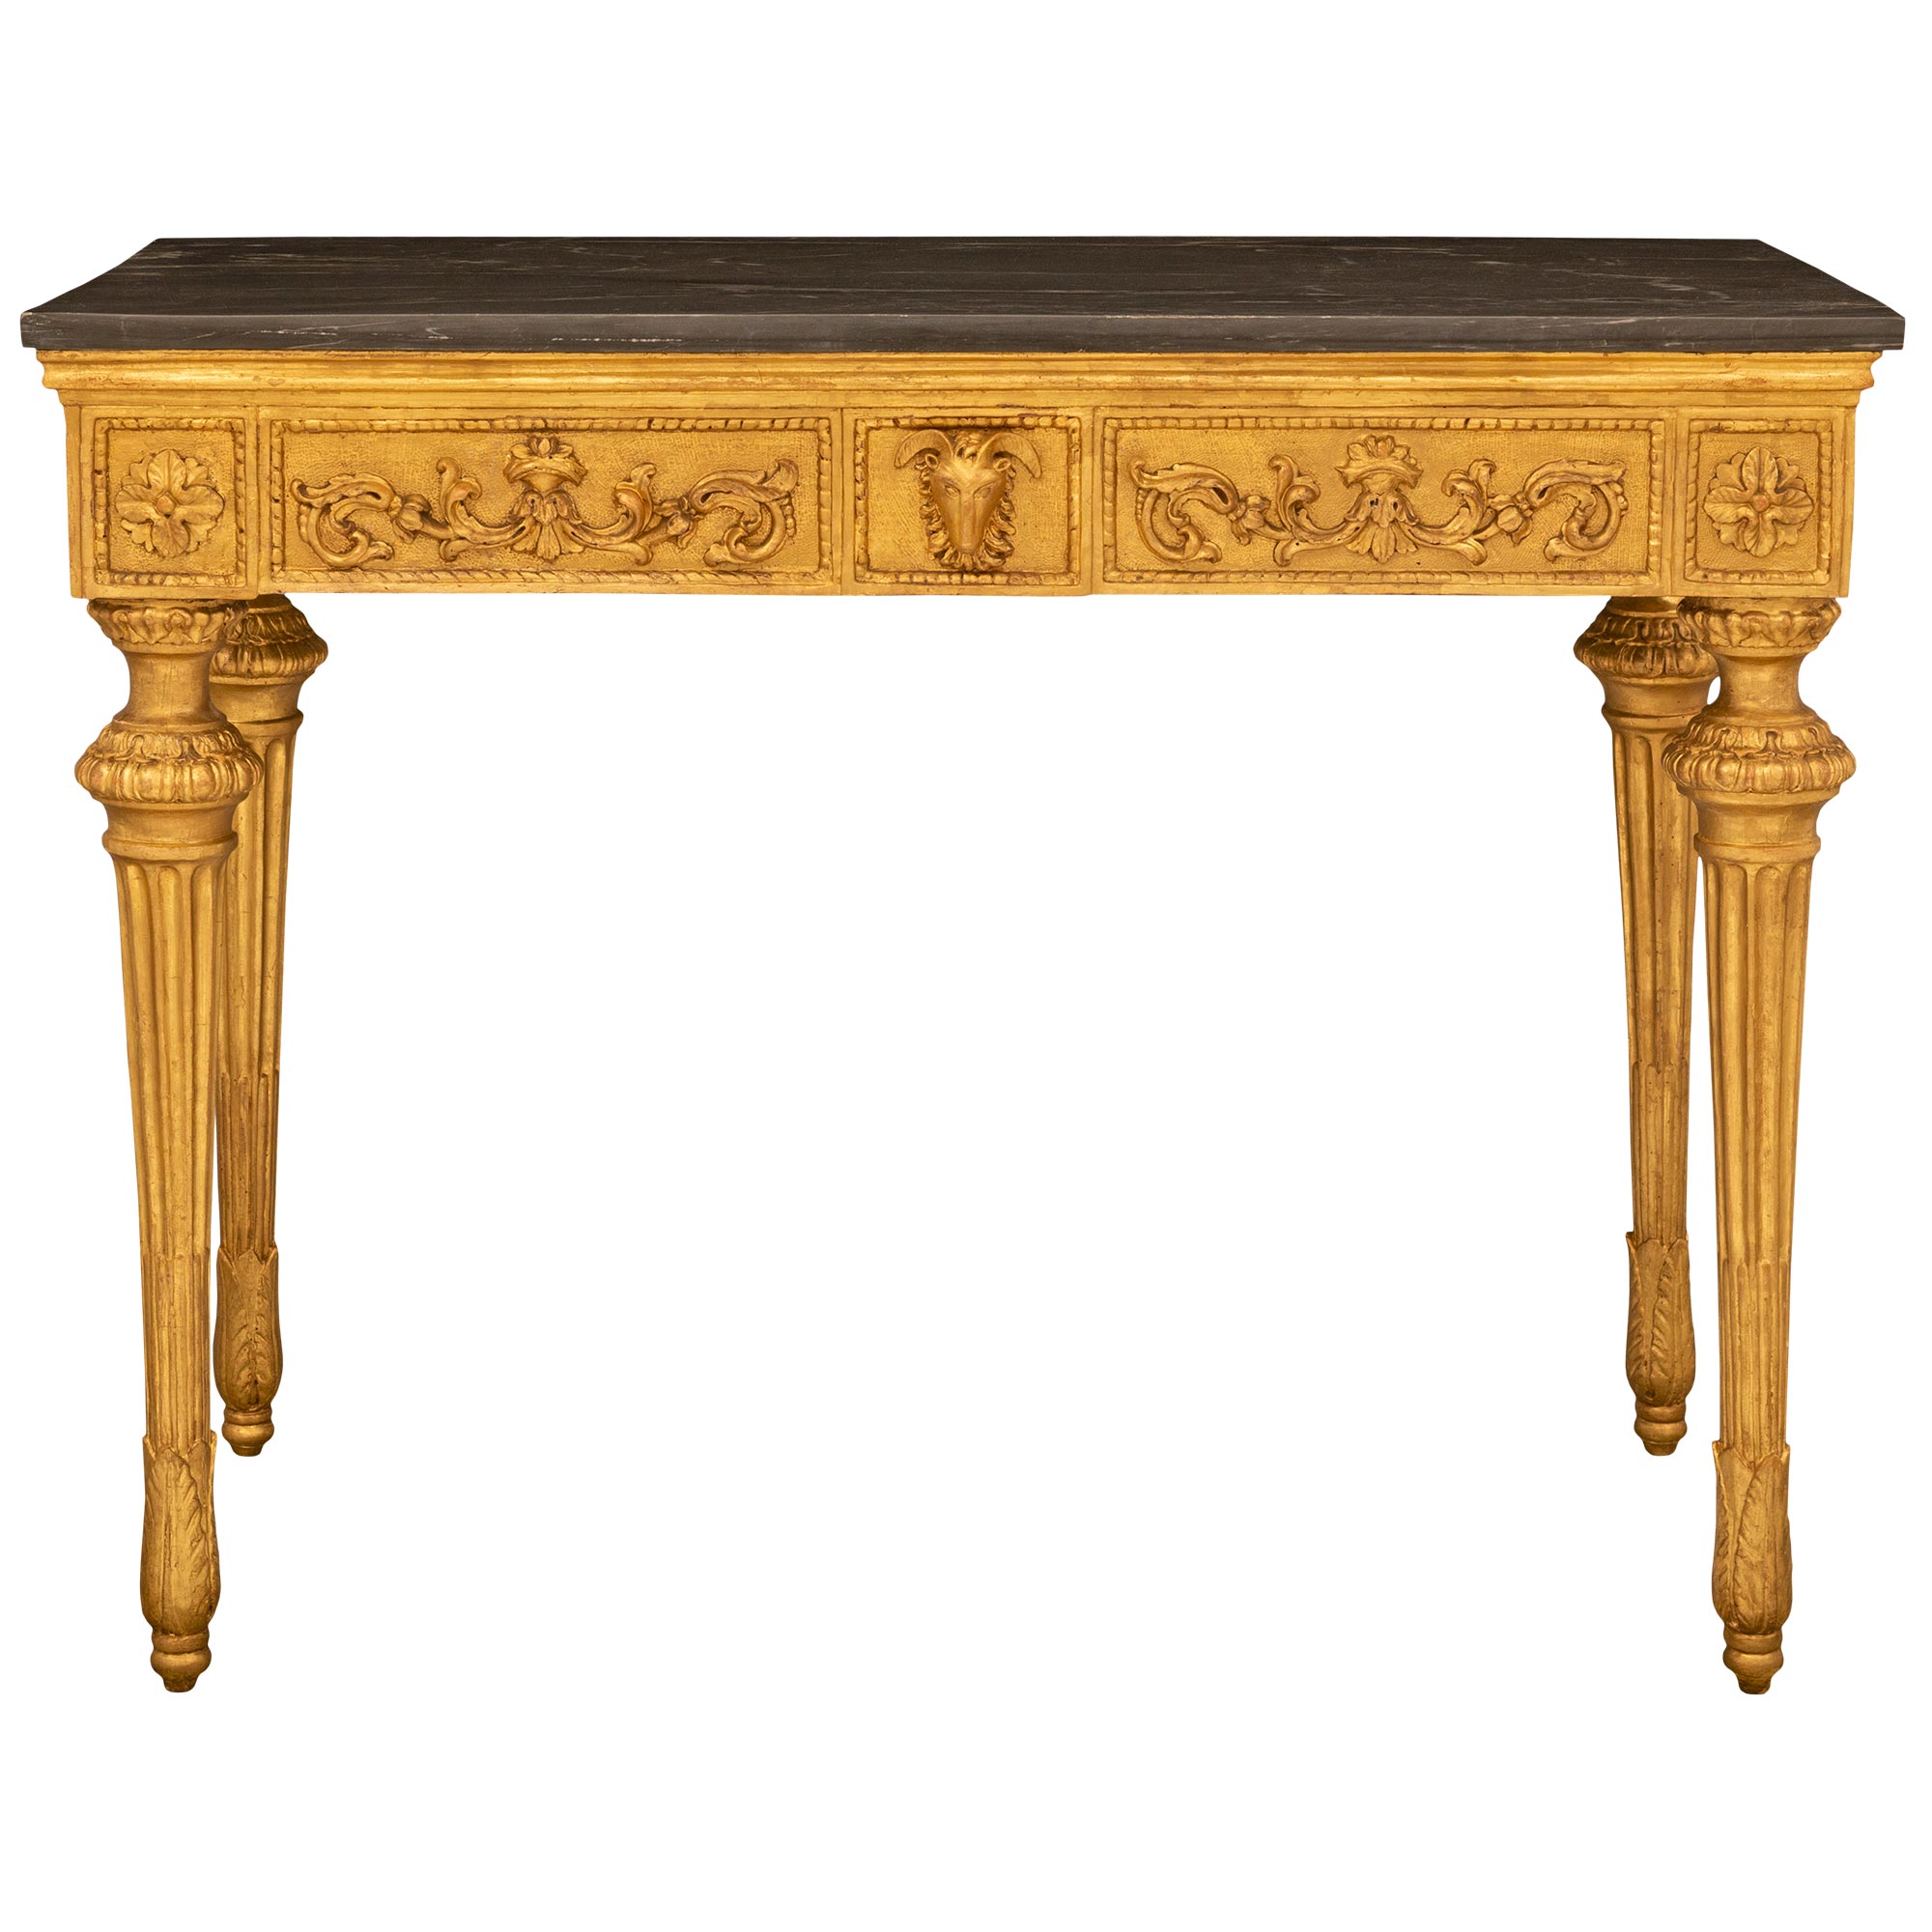 Italian 18th Century Louis XVI Period Giltwood & Marble Freestanding Console For Sale